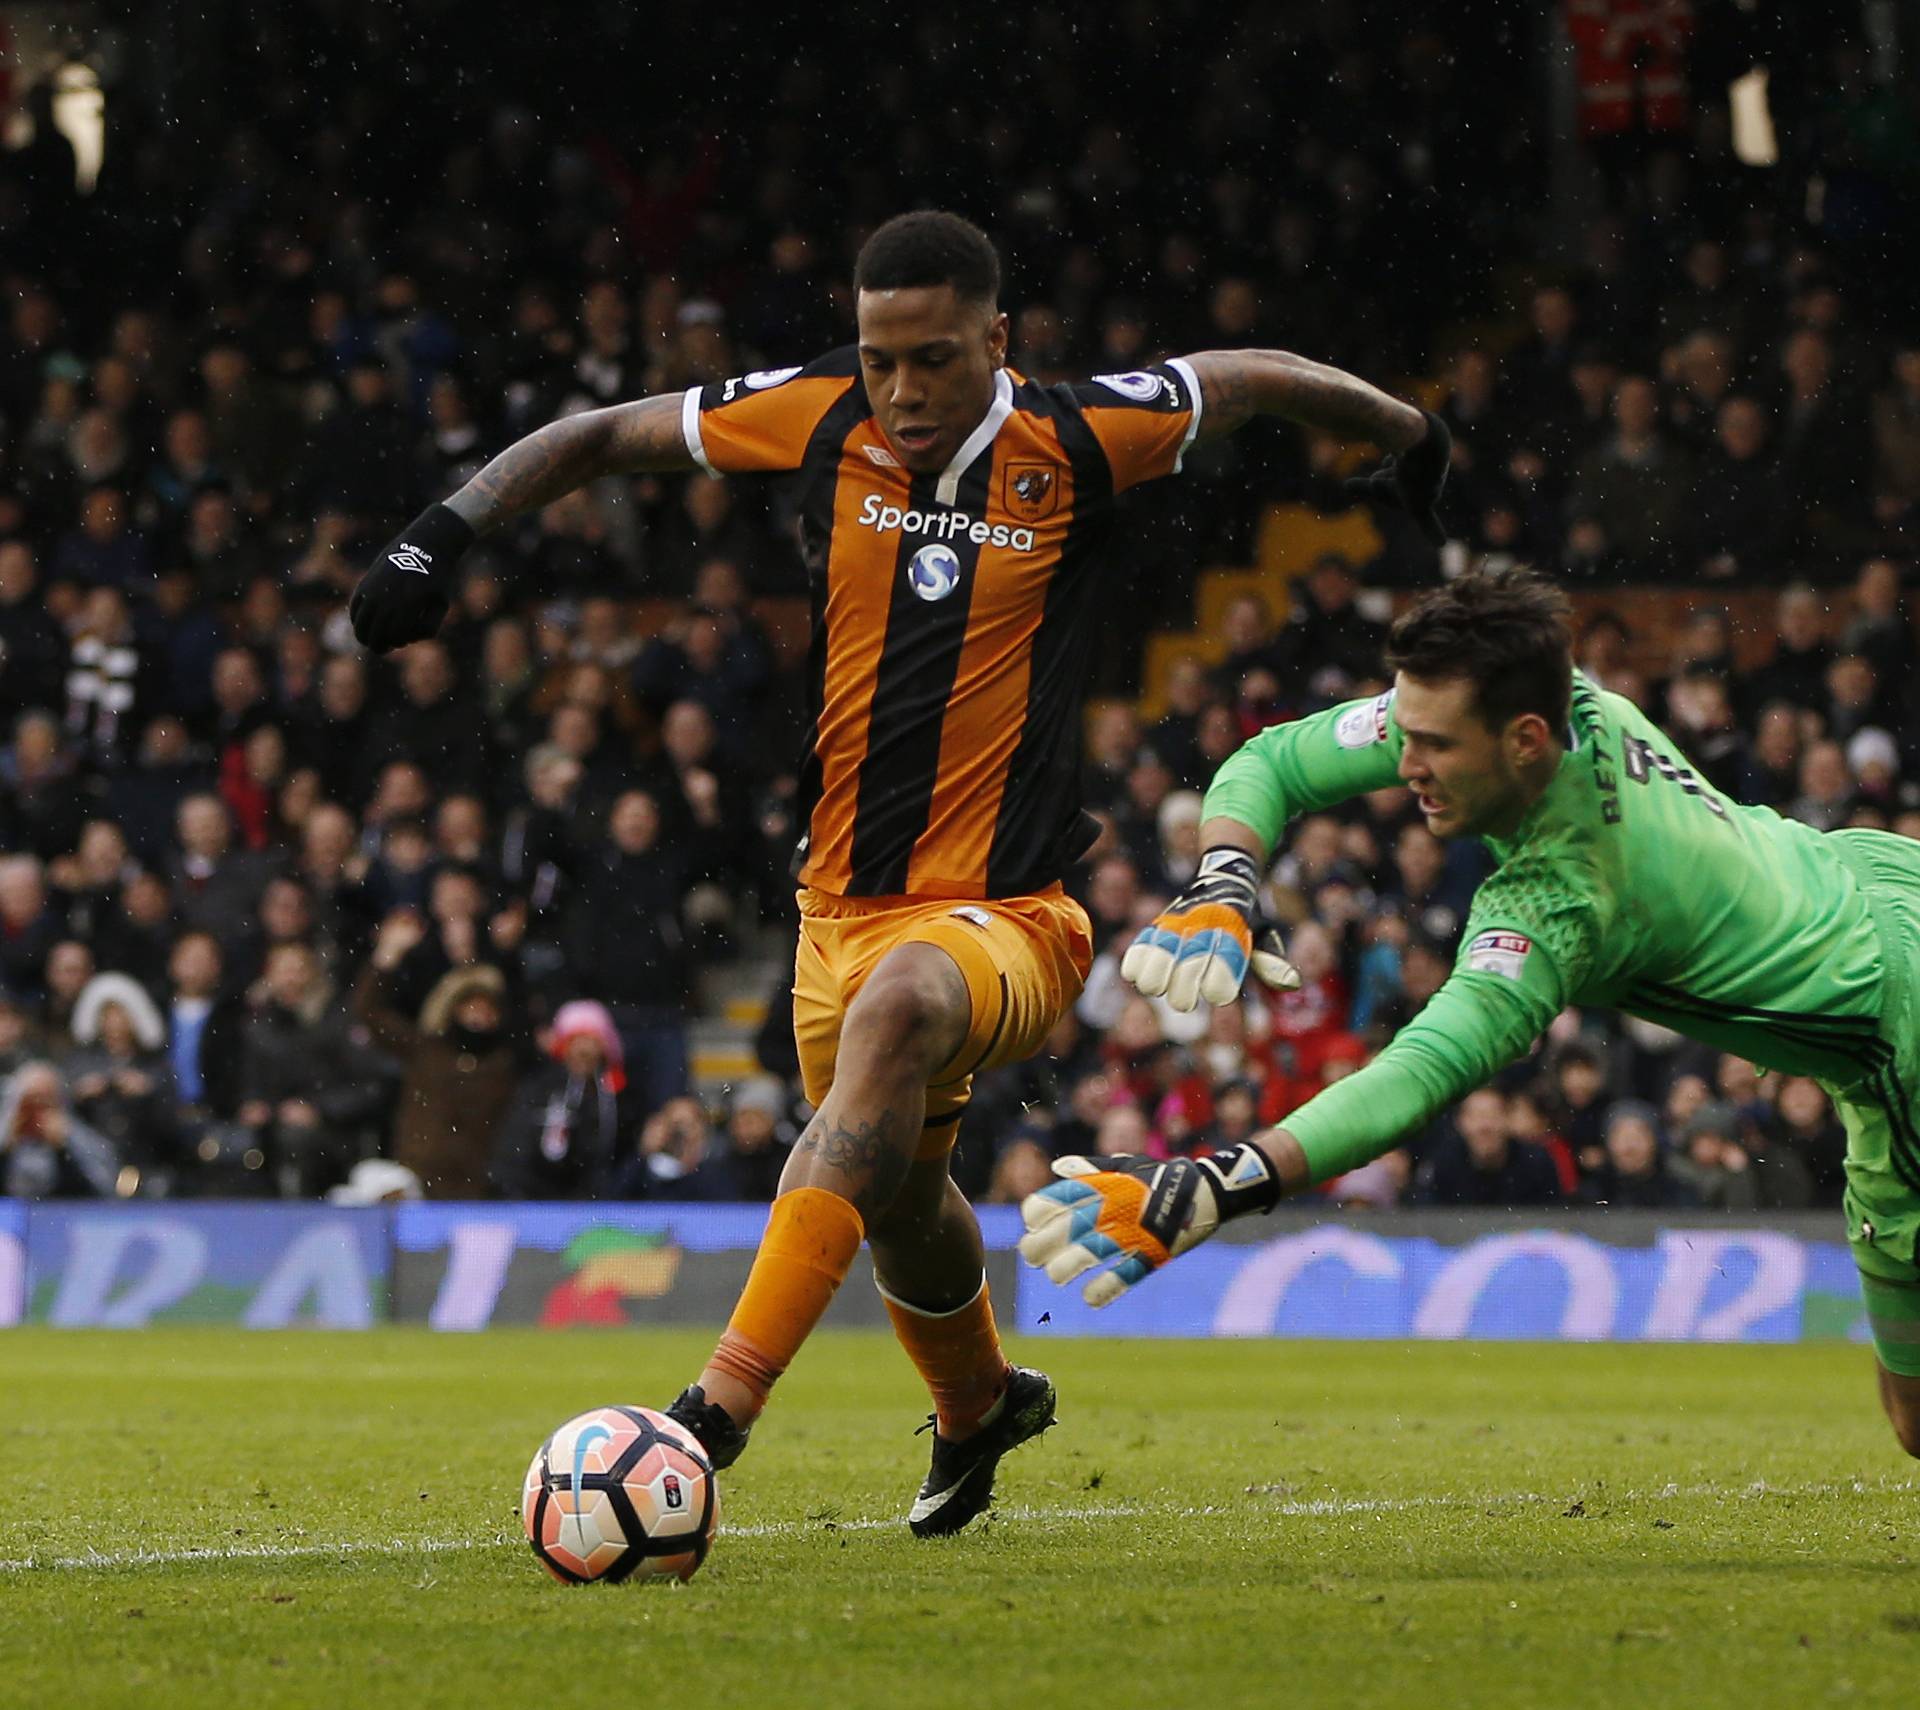 Fulham's Marcus Bettinelli fouls Hull City's Abel Hernandez and a penalty is awarded